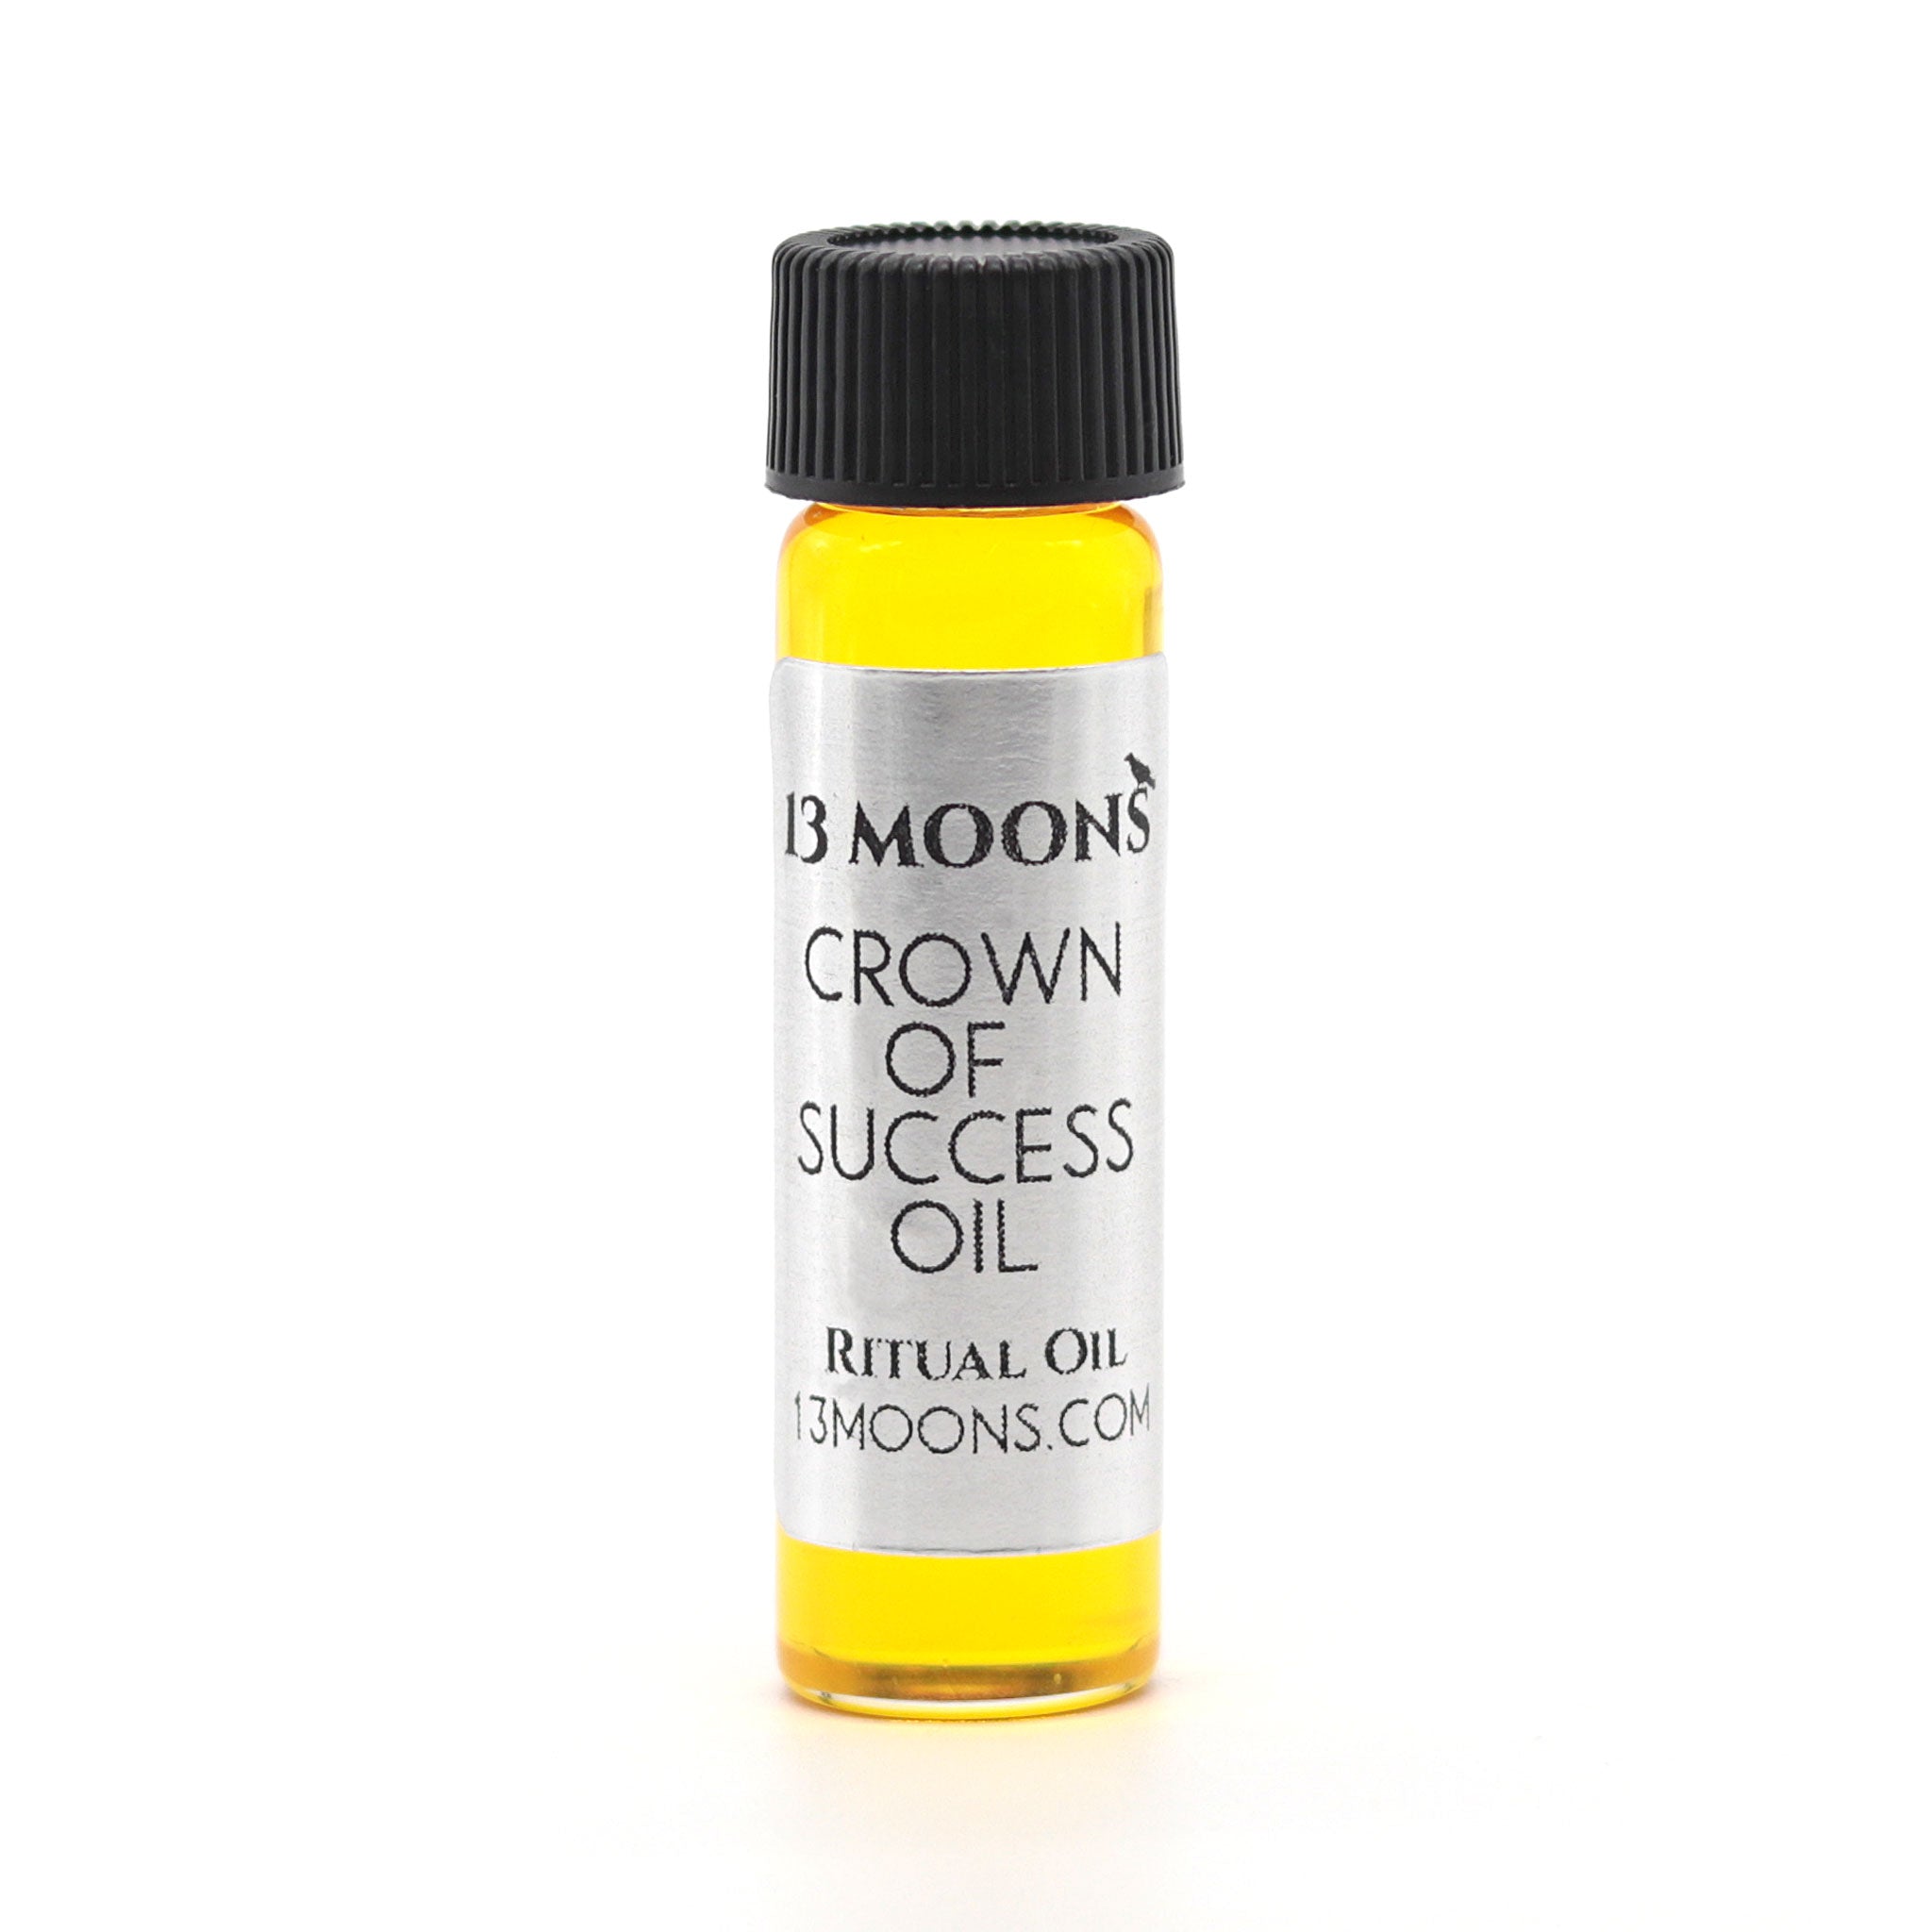 Crown of Success Oil by 13 Moons - 13 Moons